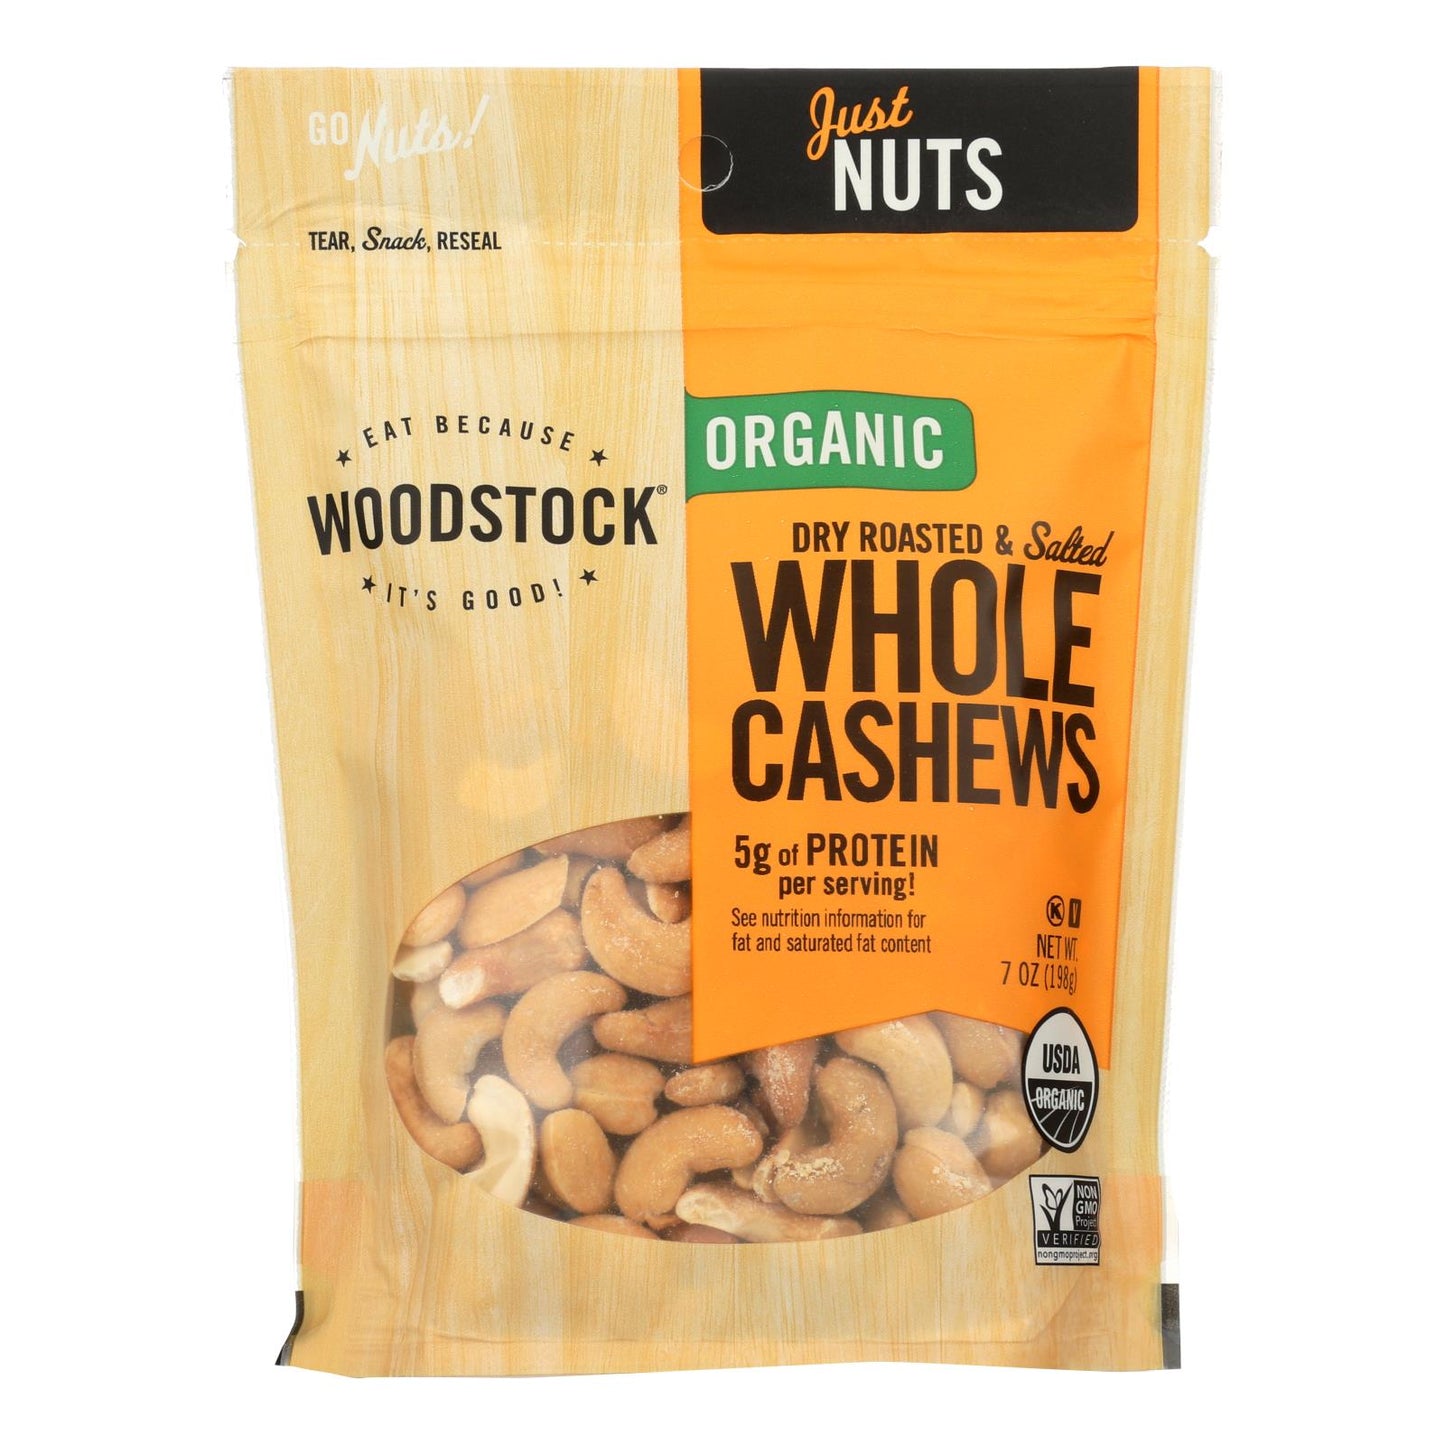 Woodstock Organic Whole Cashews, Dry Roasted And Salted - Case Of 8 - 7 Oz